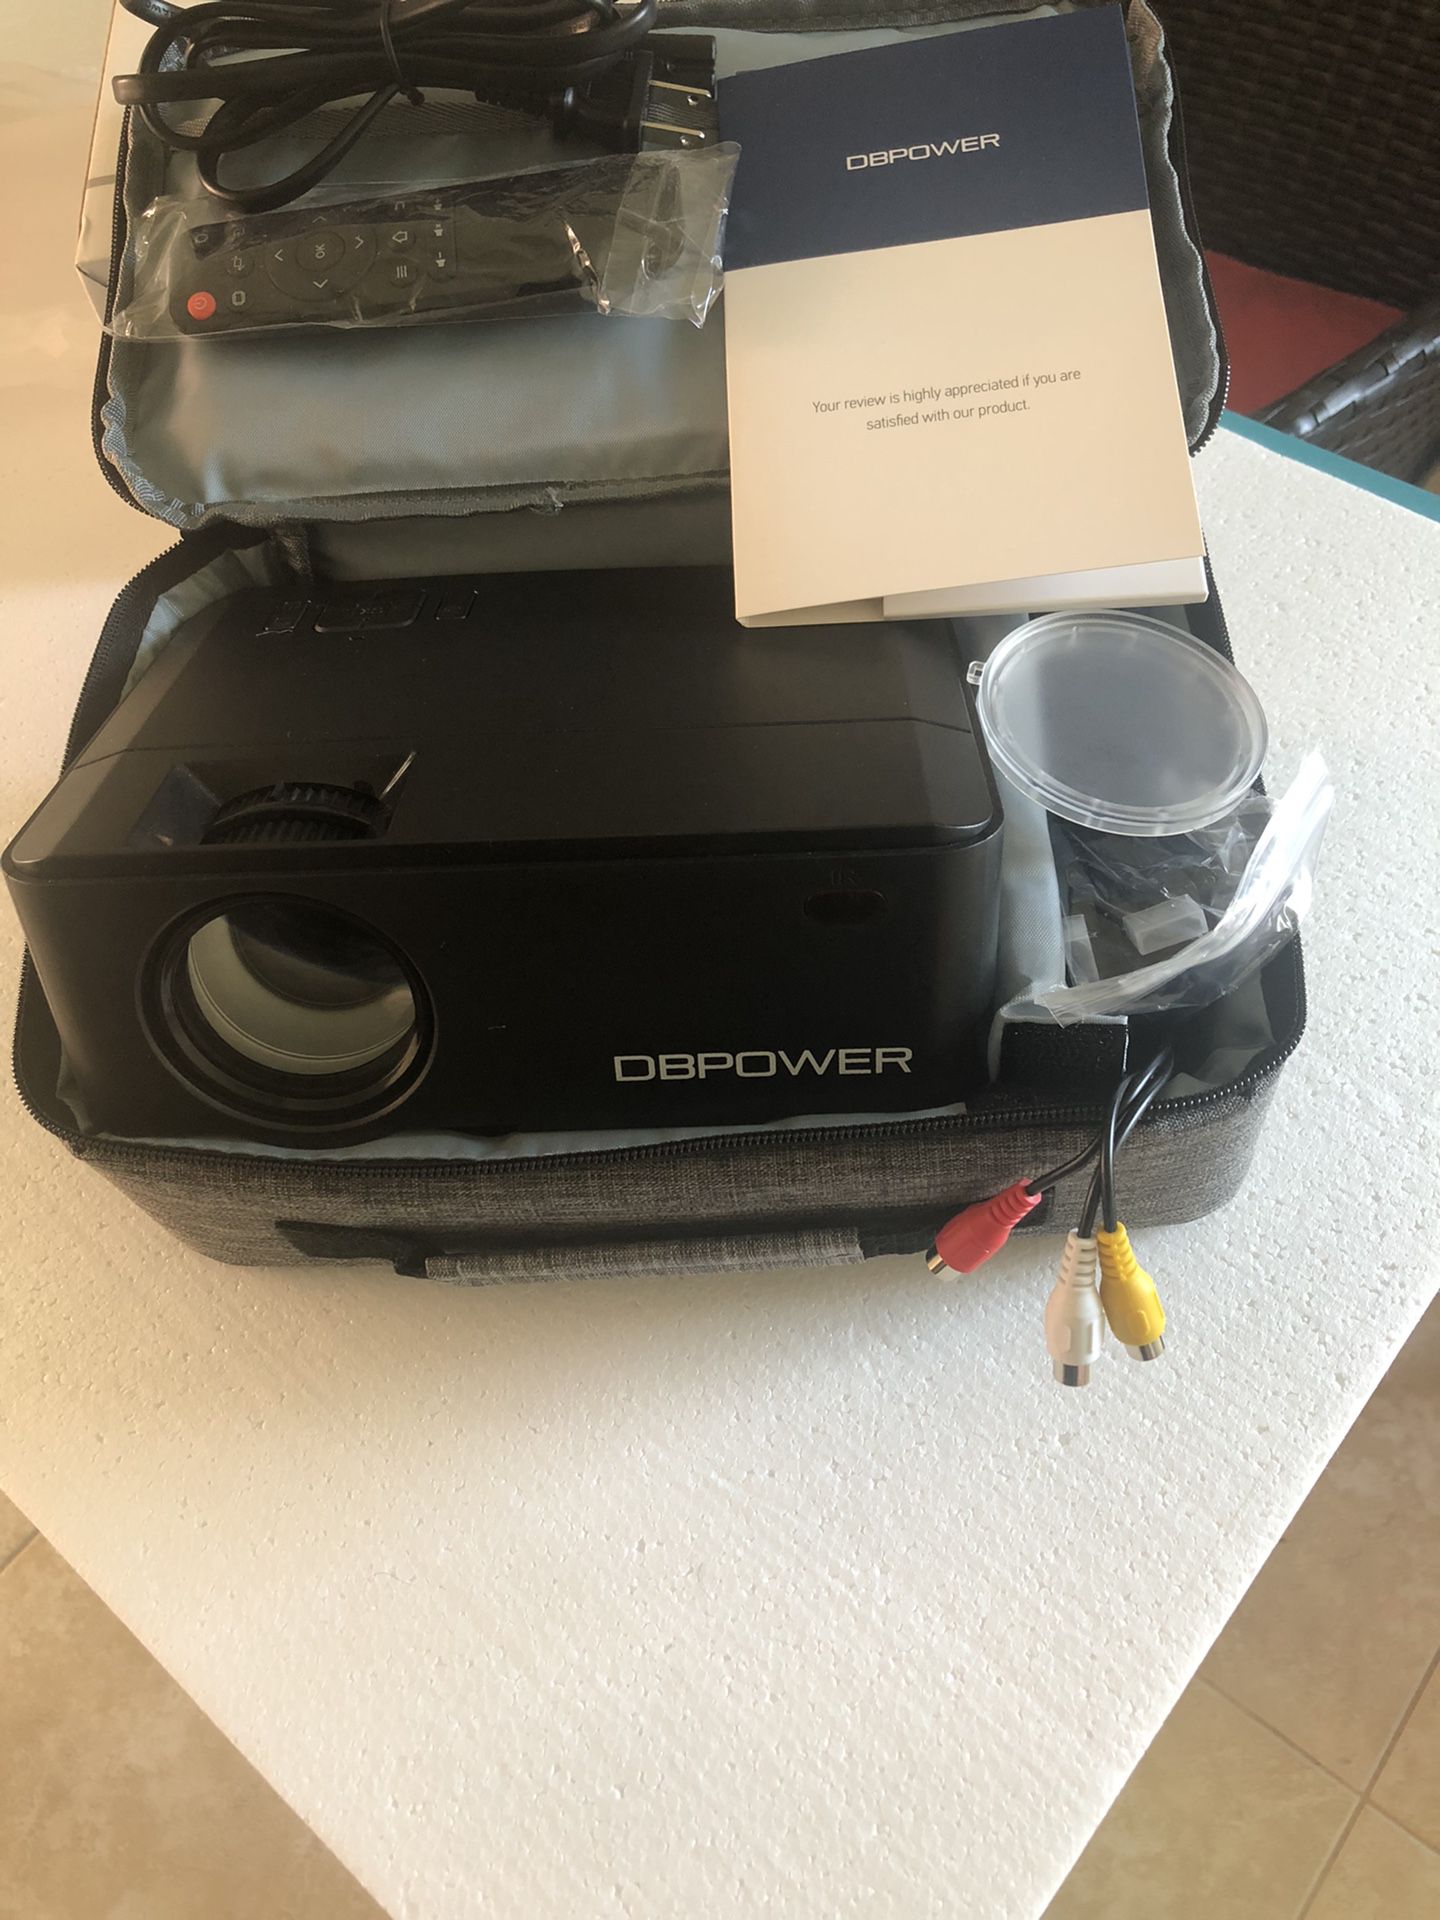 Projector- Connect Phone and Laptop- Brand New 